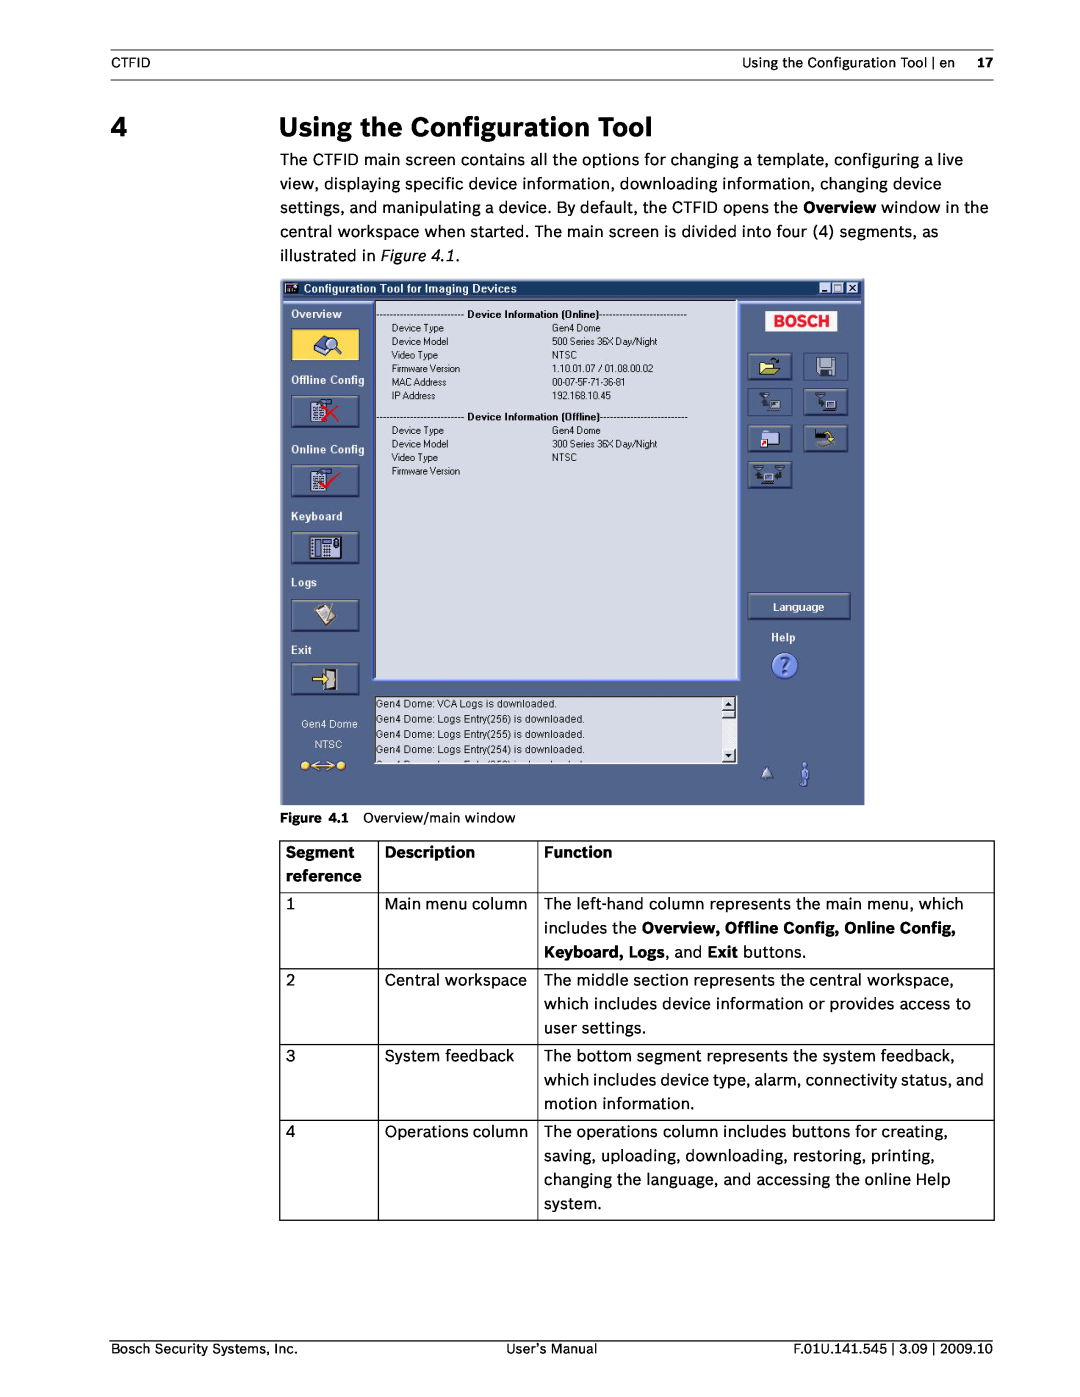 Bosch Appliances VP-CFGSFT user manual 4Using the Configuration Tool, Segment, Description, Function, reference 